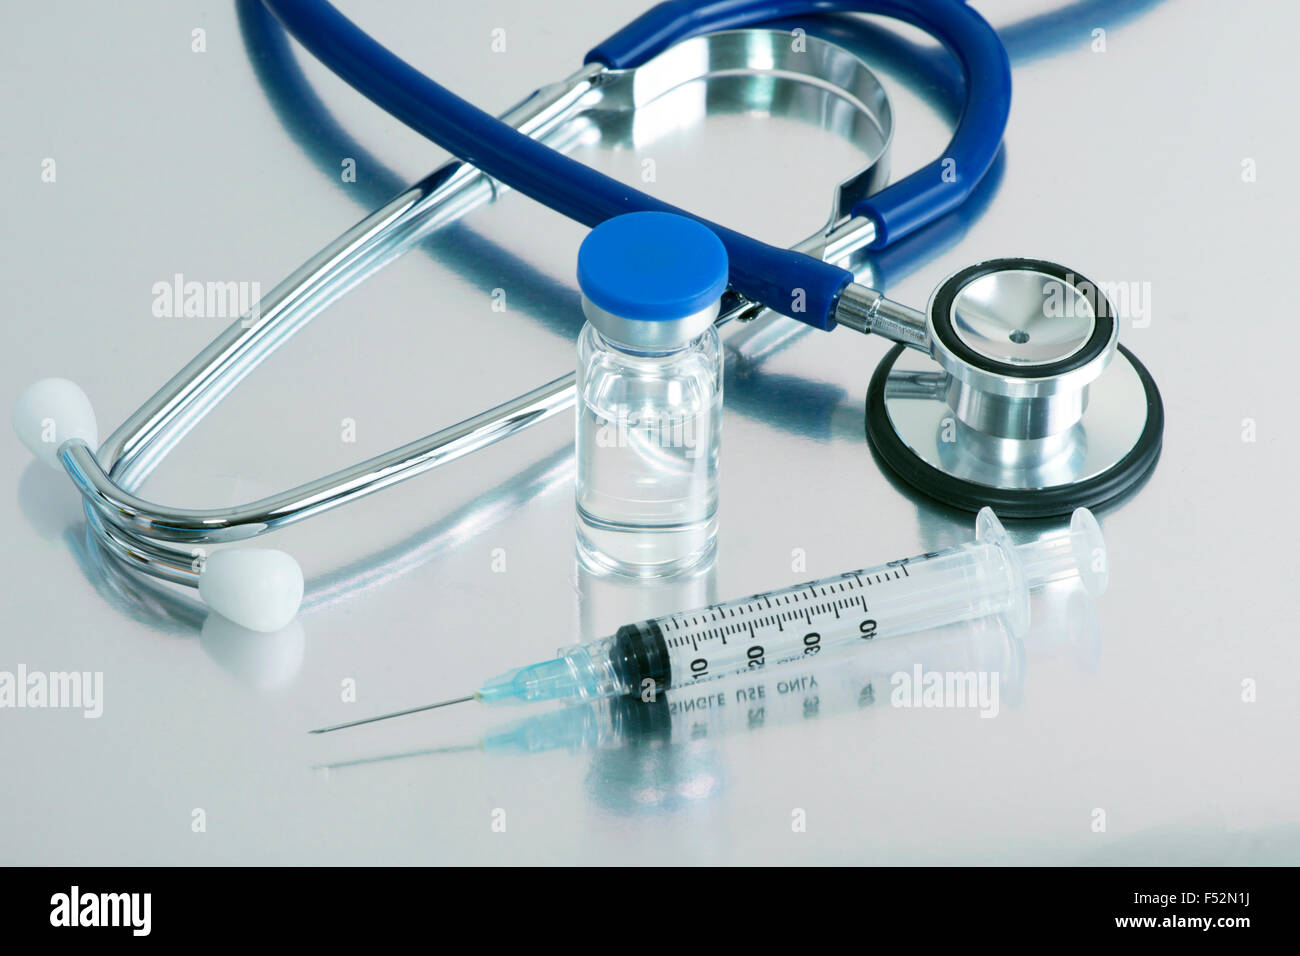 Syringe, vial and stethoscope on surgical tray. Stock Photo